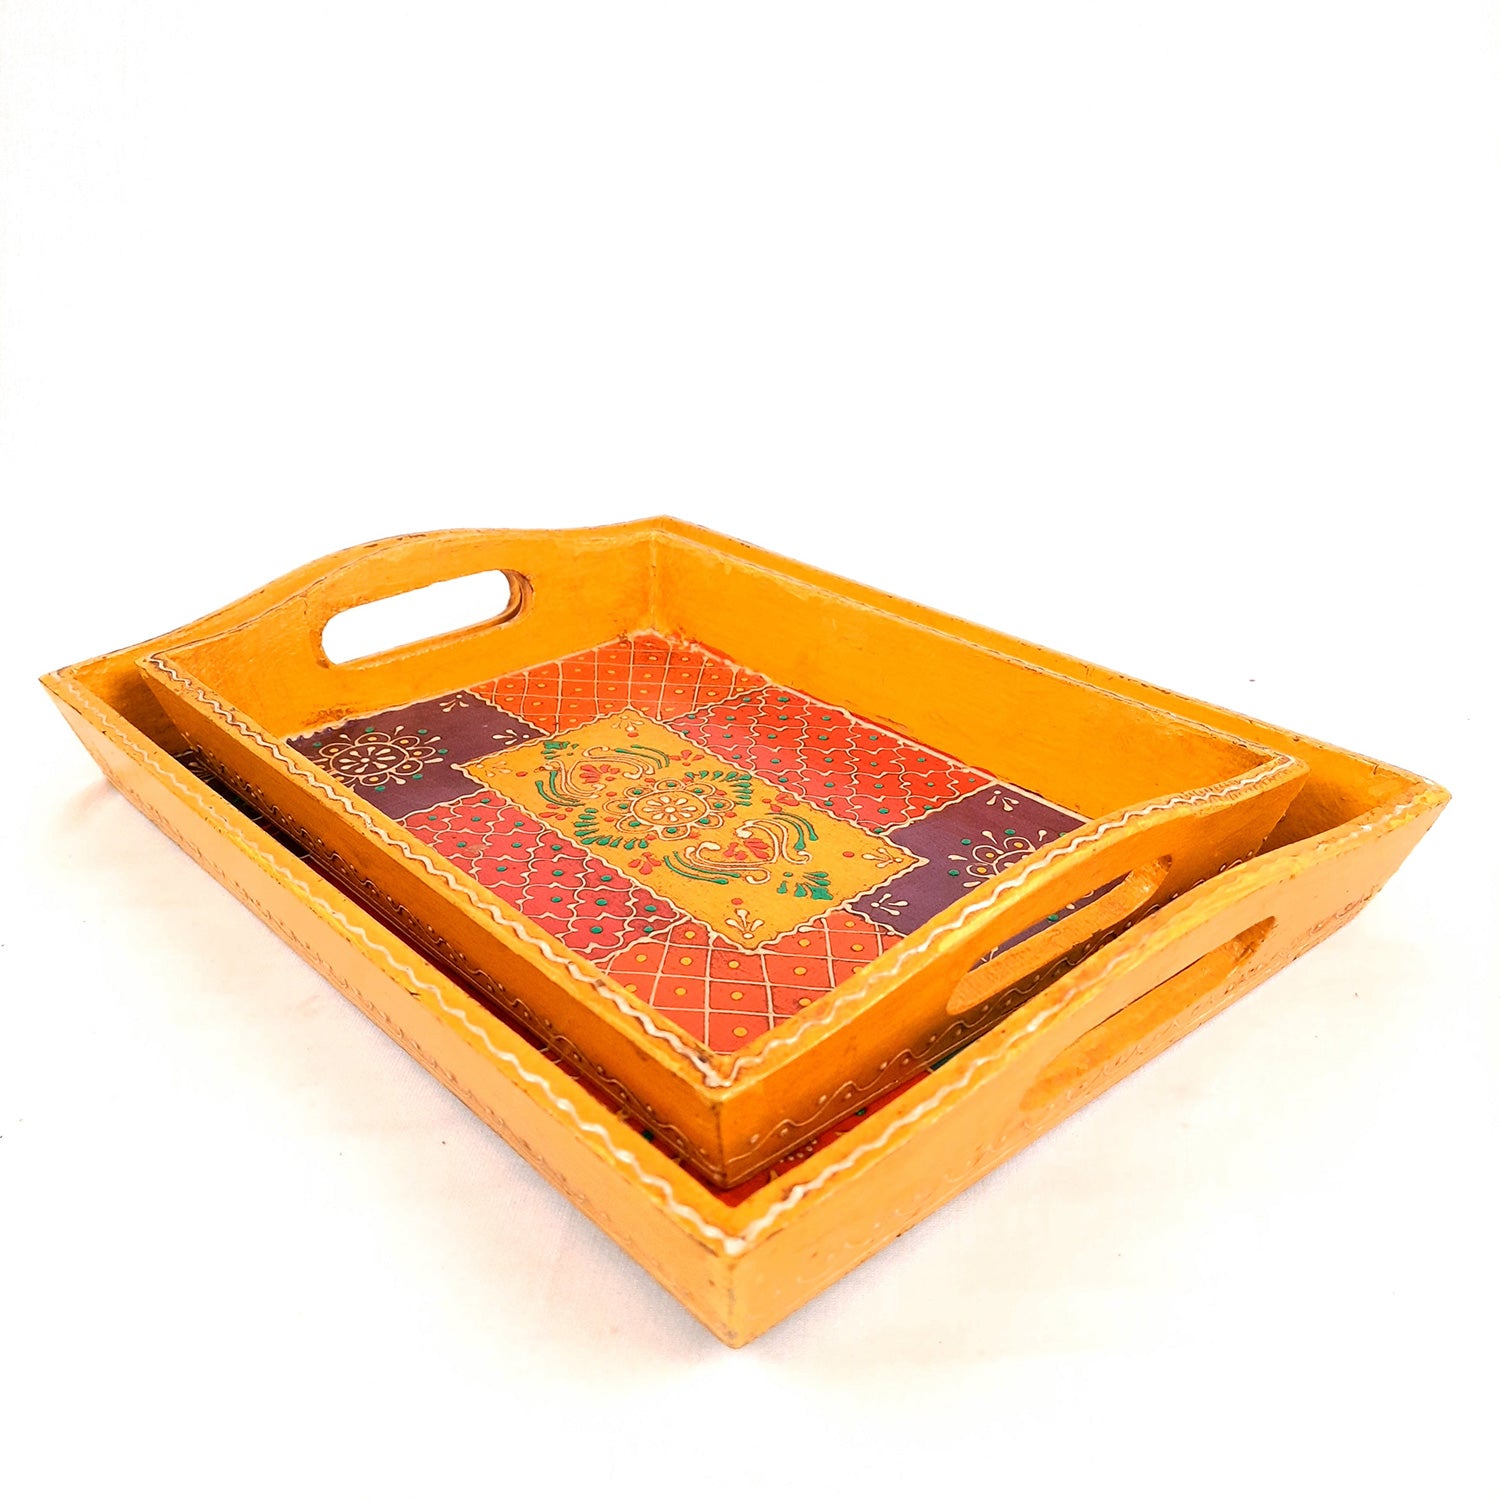 Wooden Tray | Serving Trays For Tea, Coffee & Snacks | Multipurpose Decorative Tray & Platters - For Home, Dining Table Organization, Kitchen & Gifts - Set of 2 - Apkamart